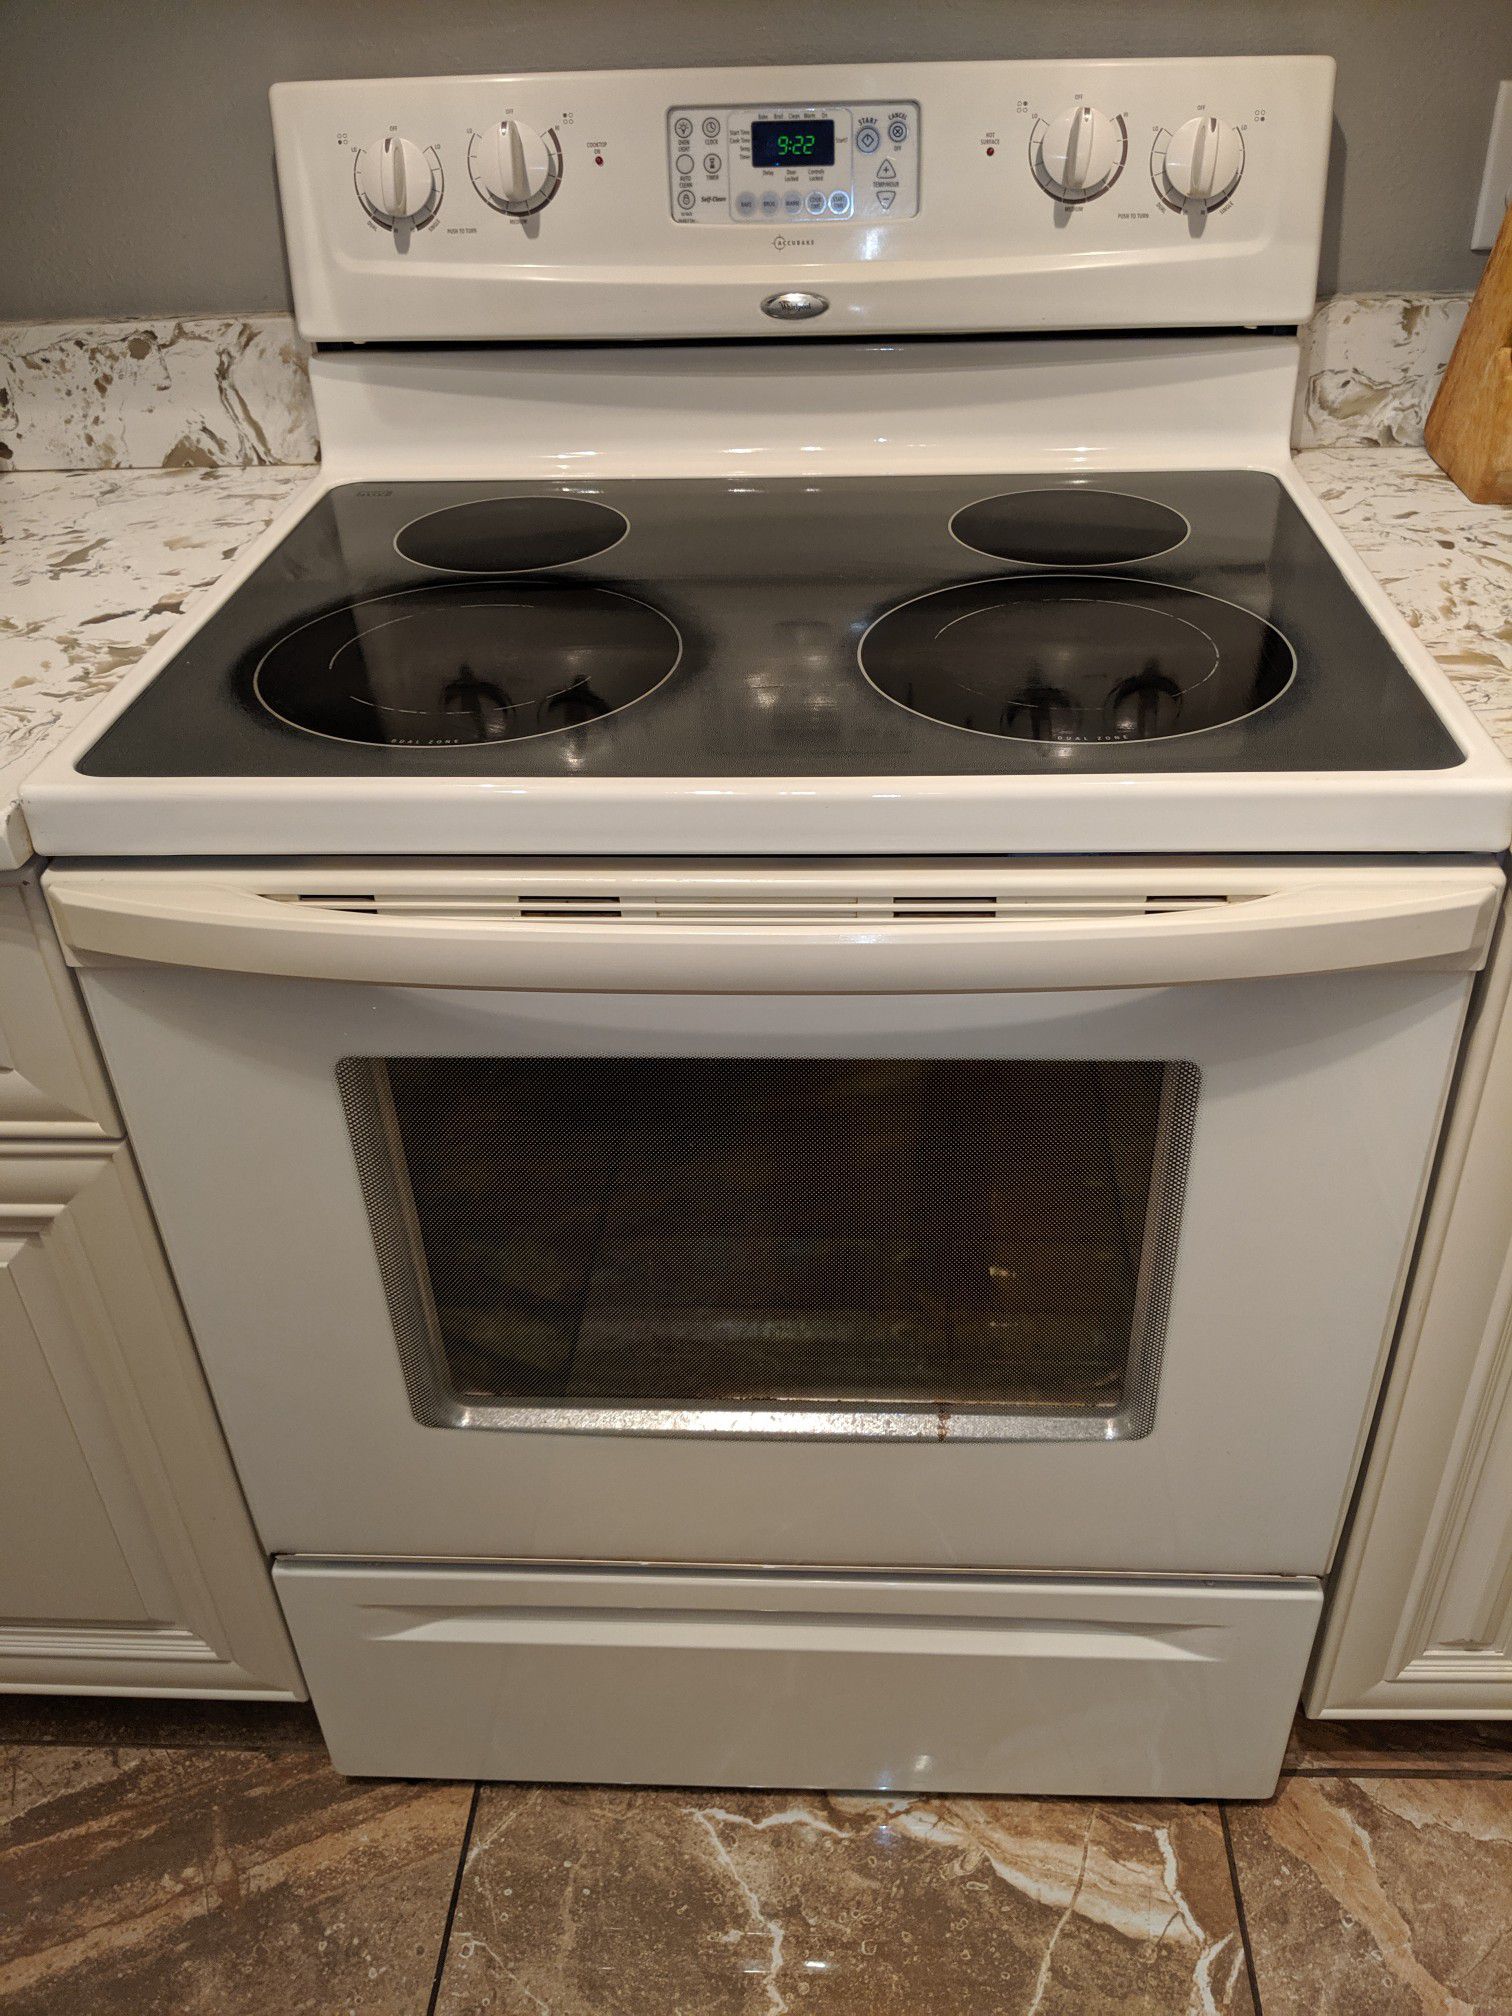 Bisque color Whirlpool Stove. Timer, oven light, ..